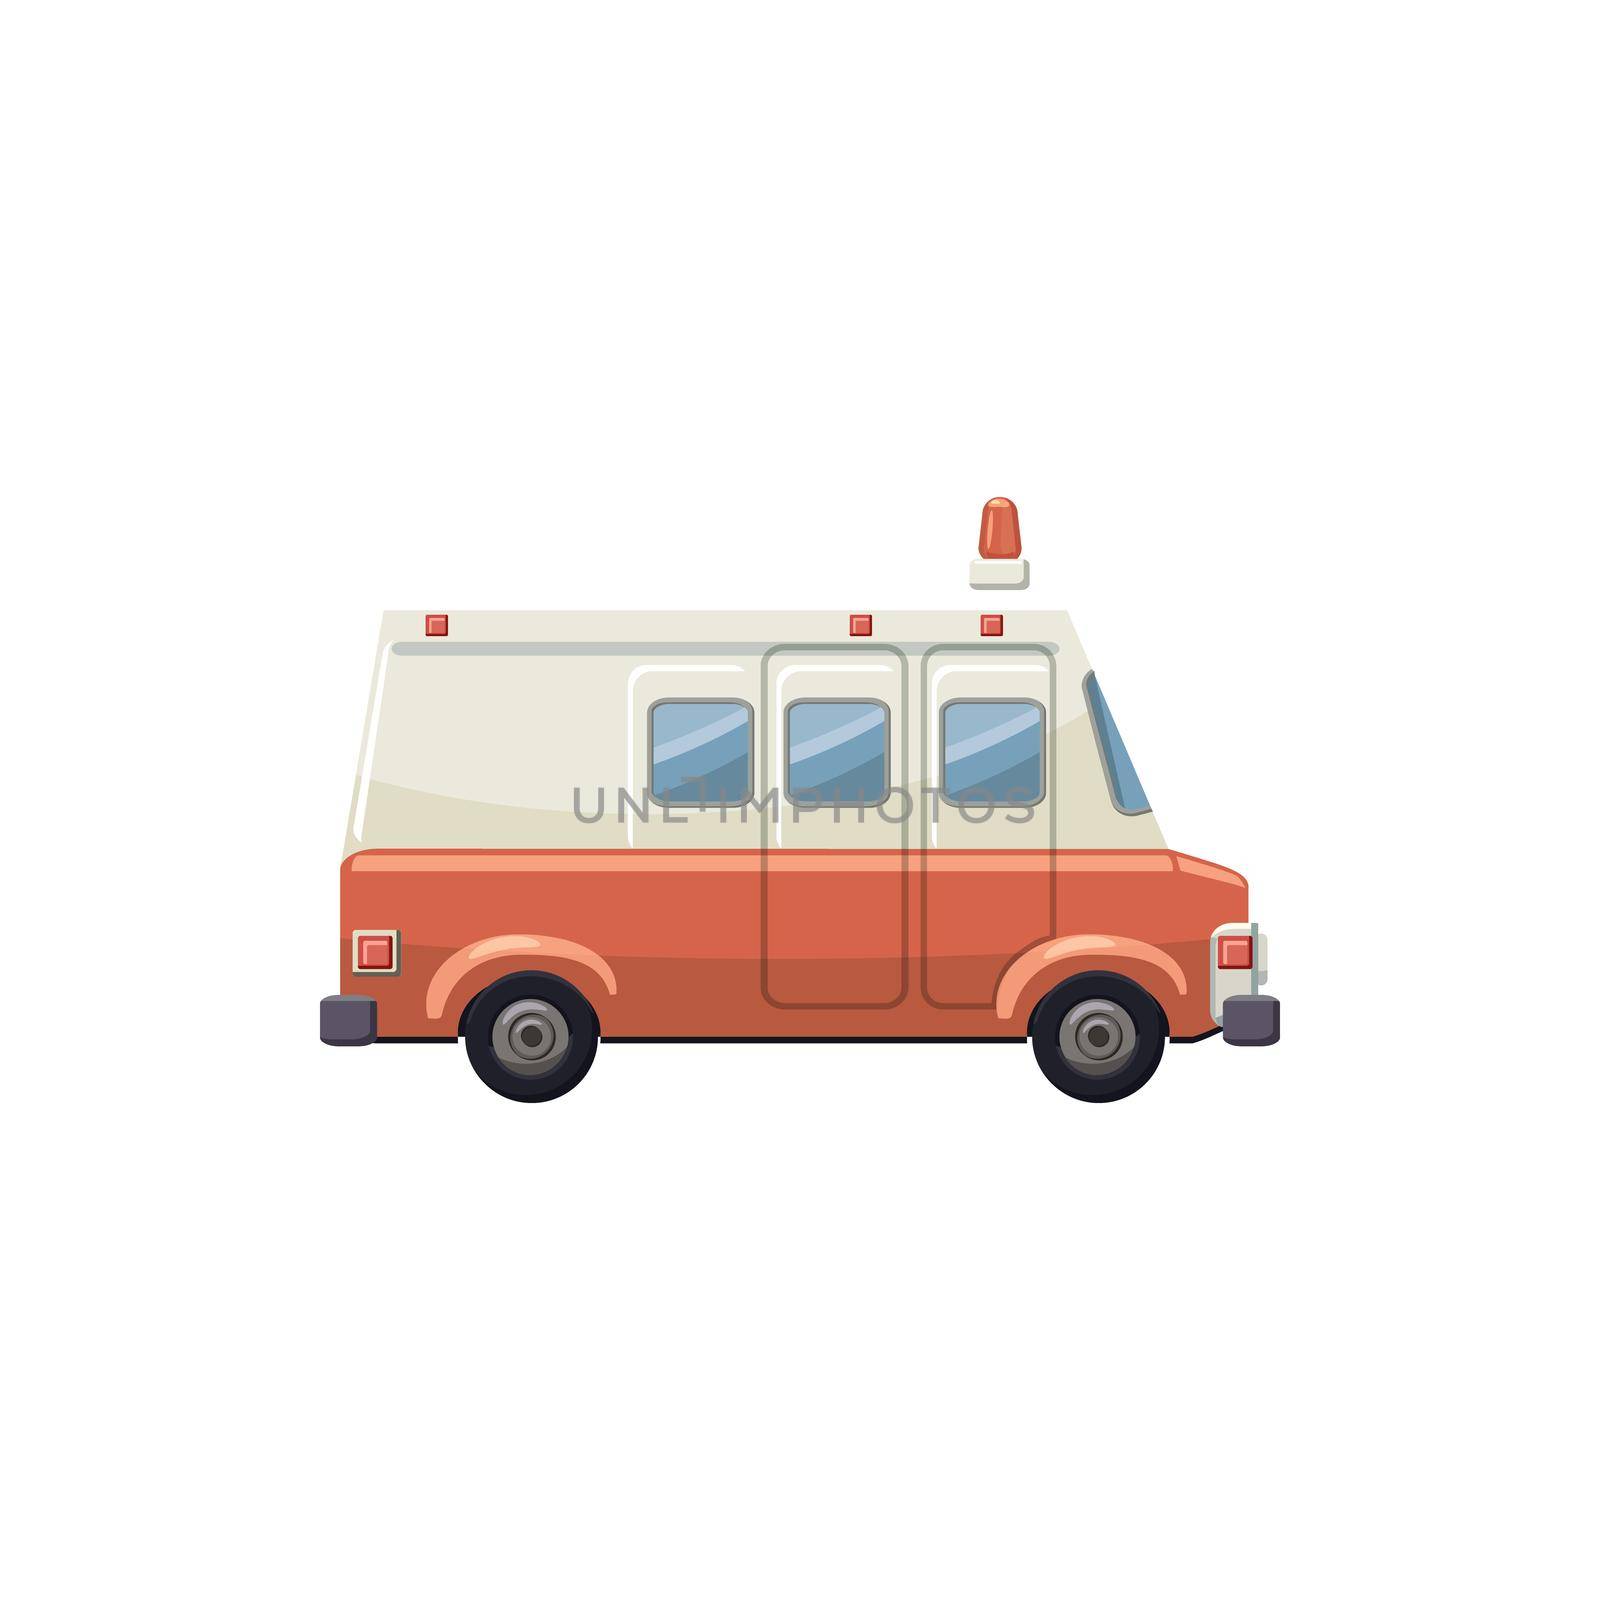 Ambulance car icon in cartoon style on a white background